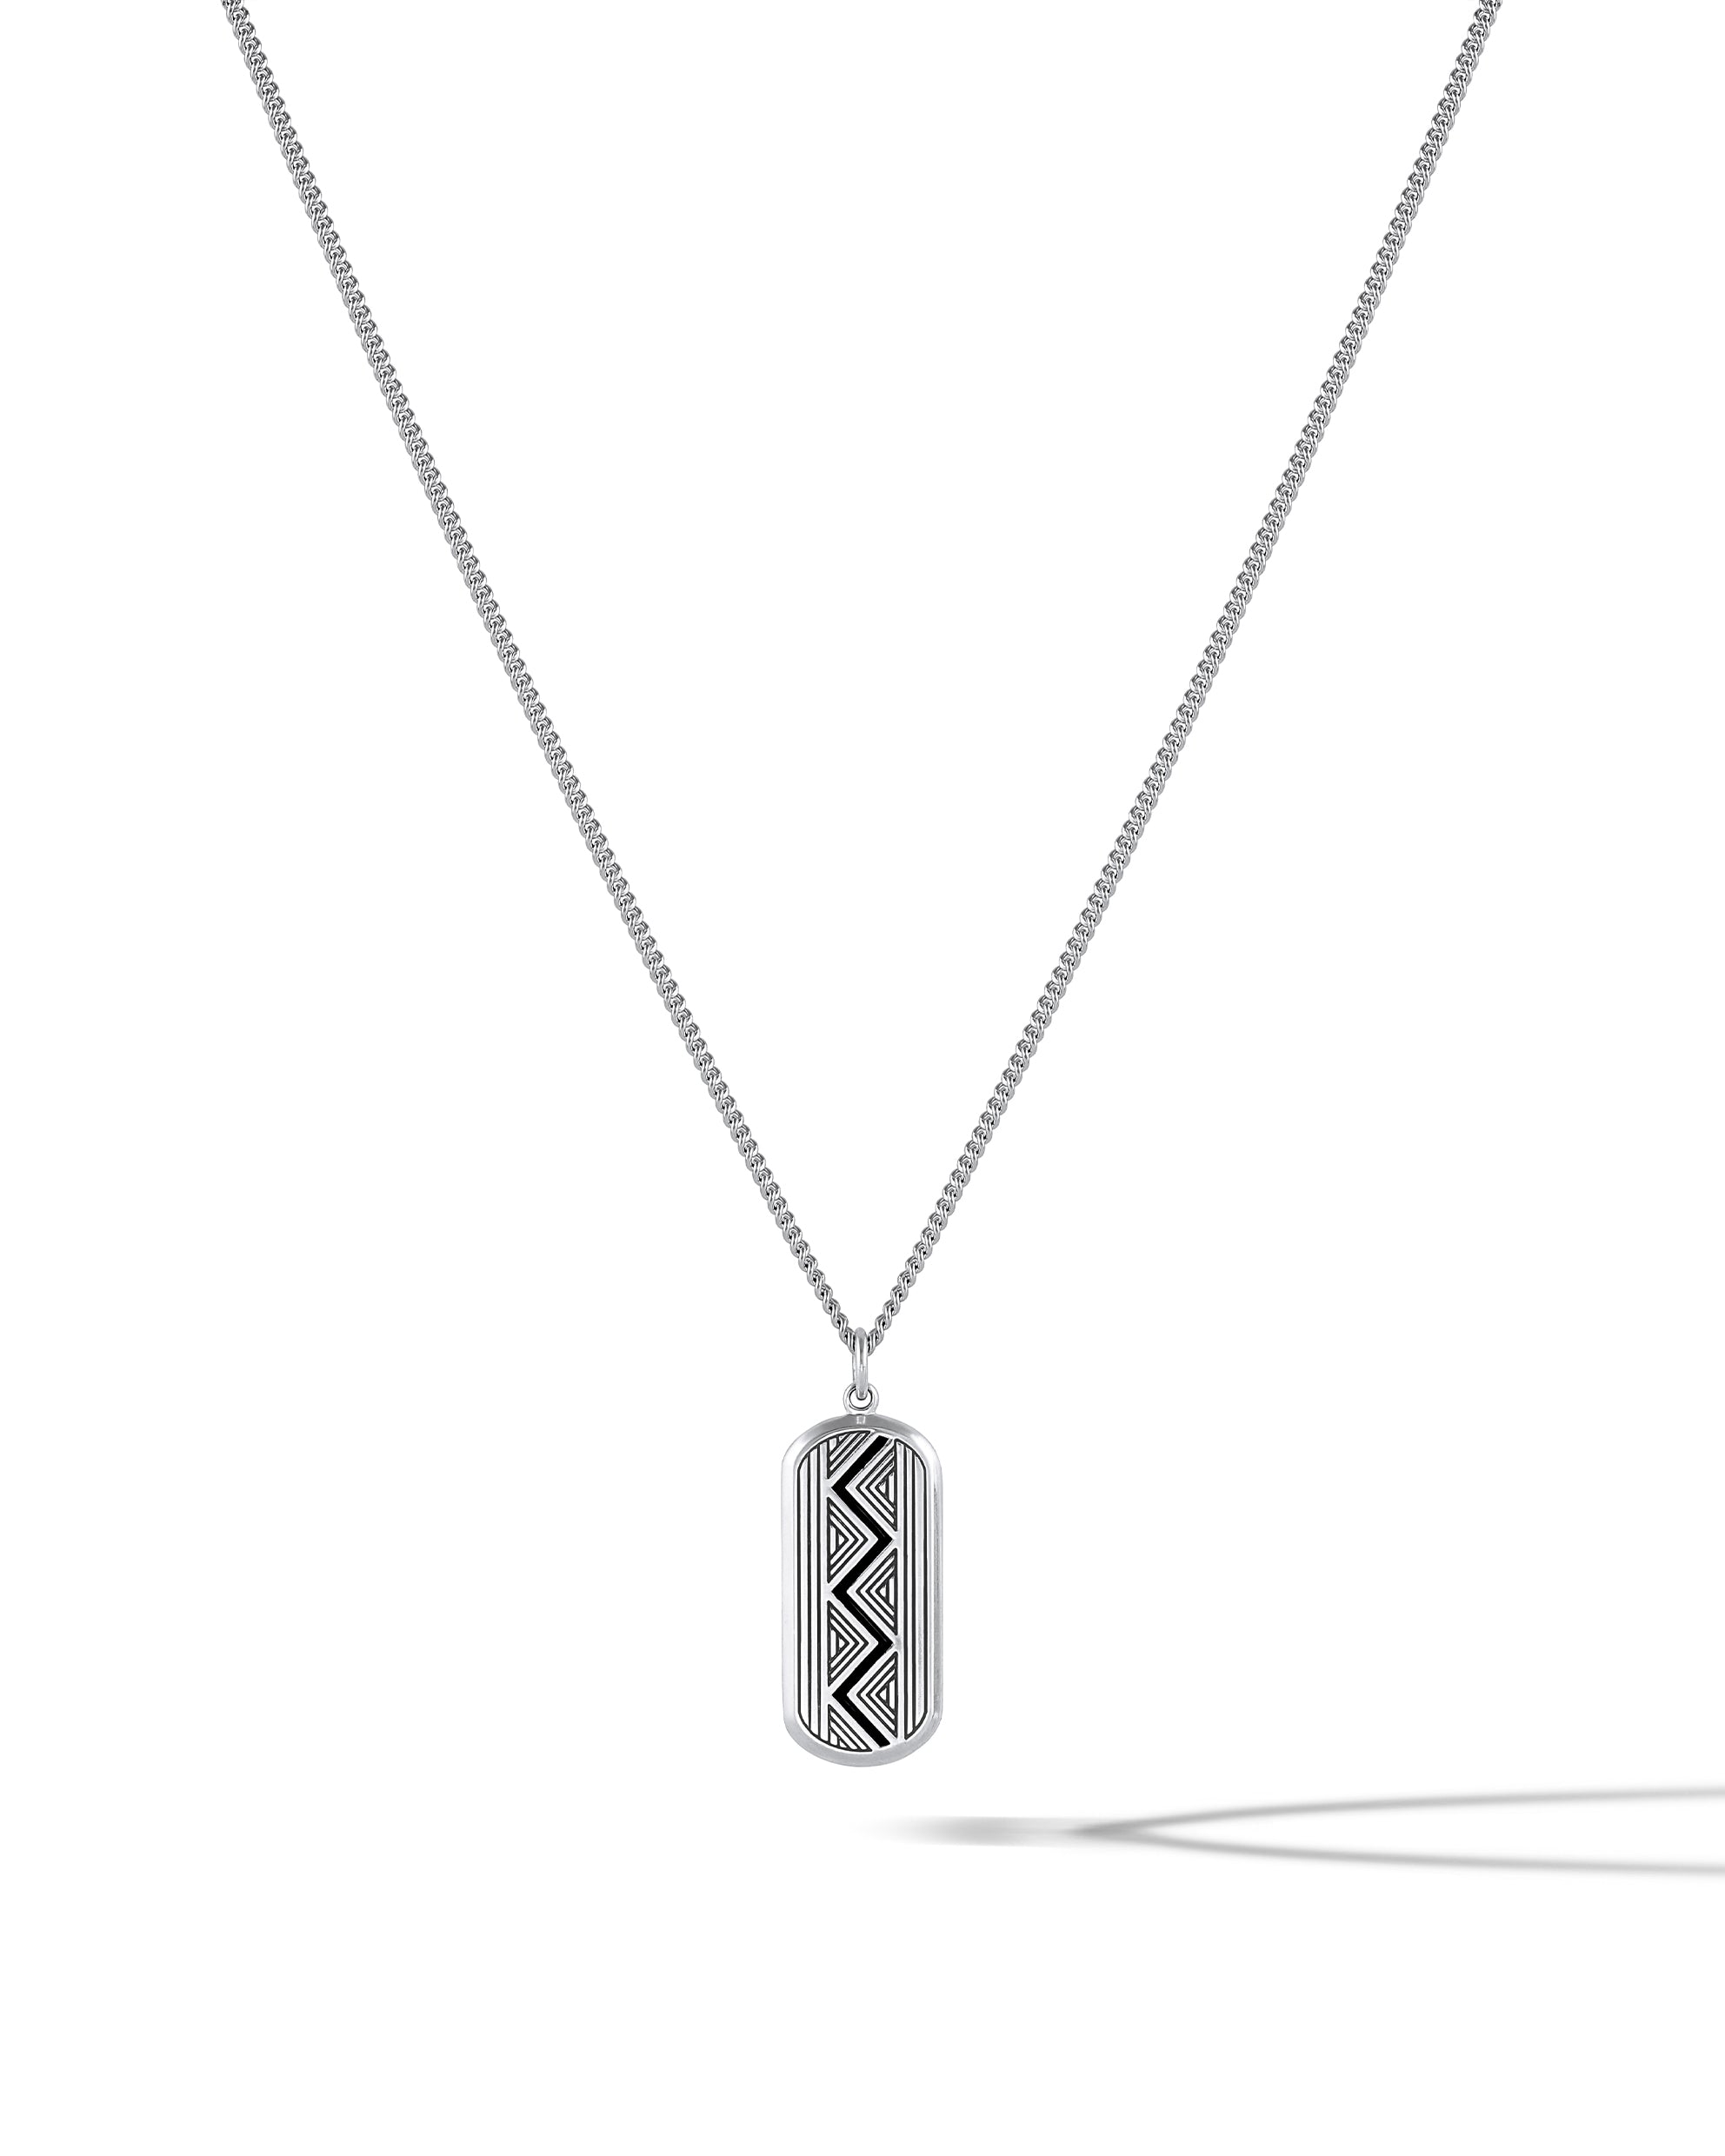 The Warrior Necklace - Brushed Silver | Vincero Watches | Vincero